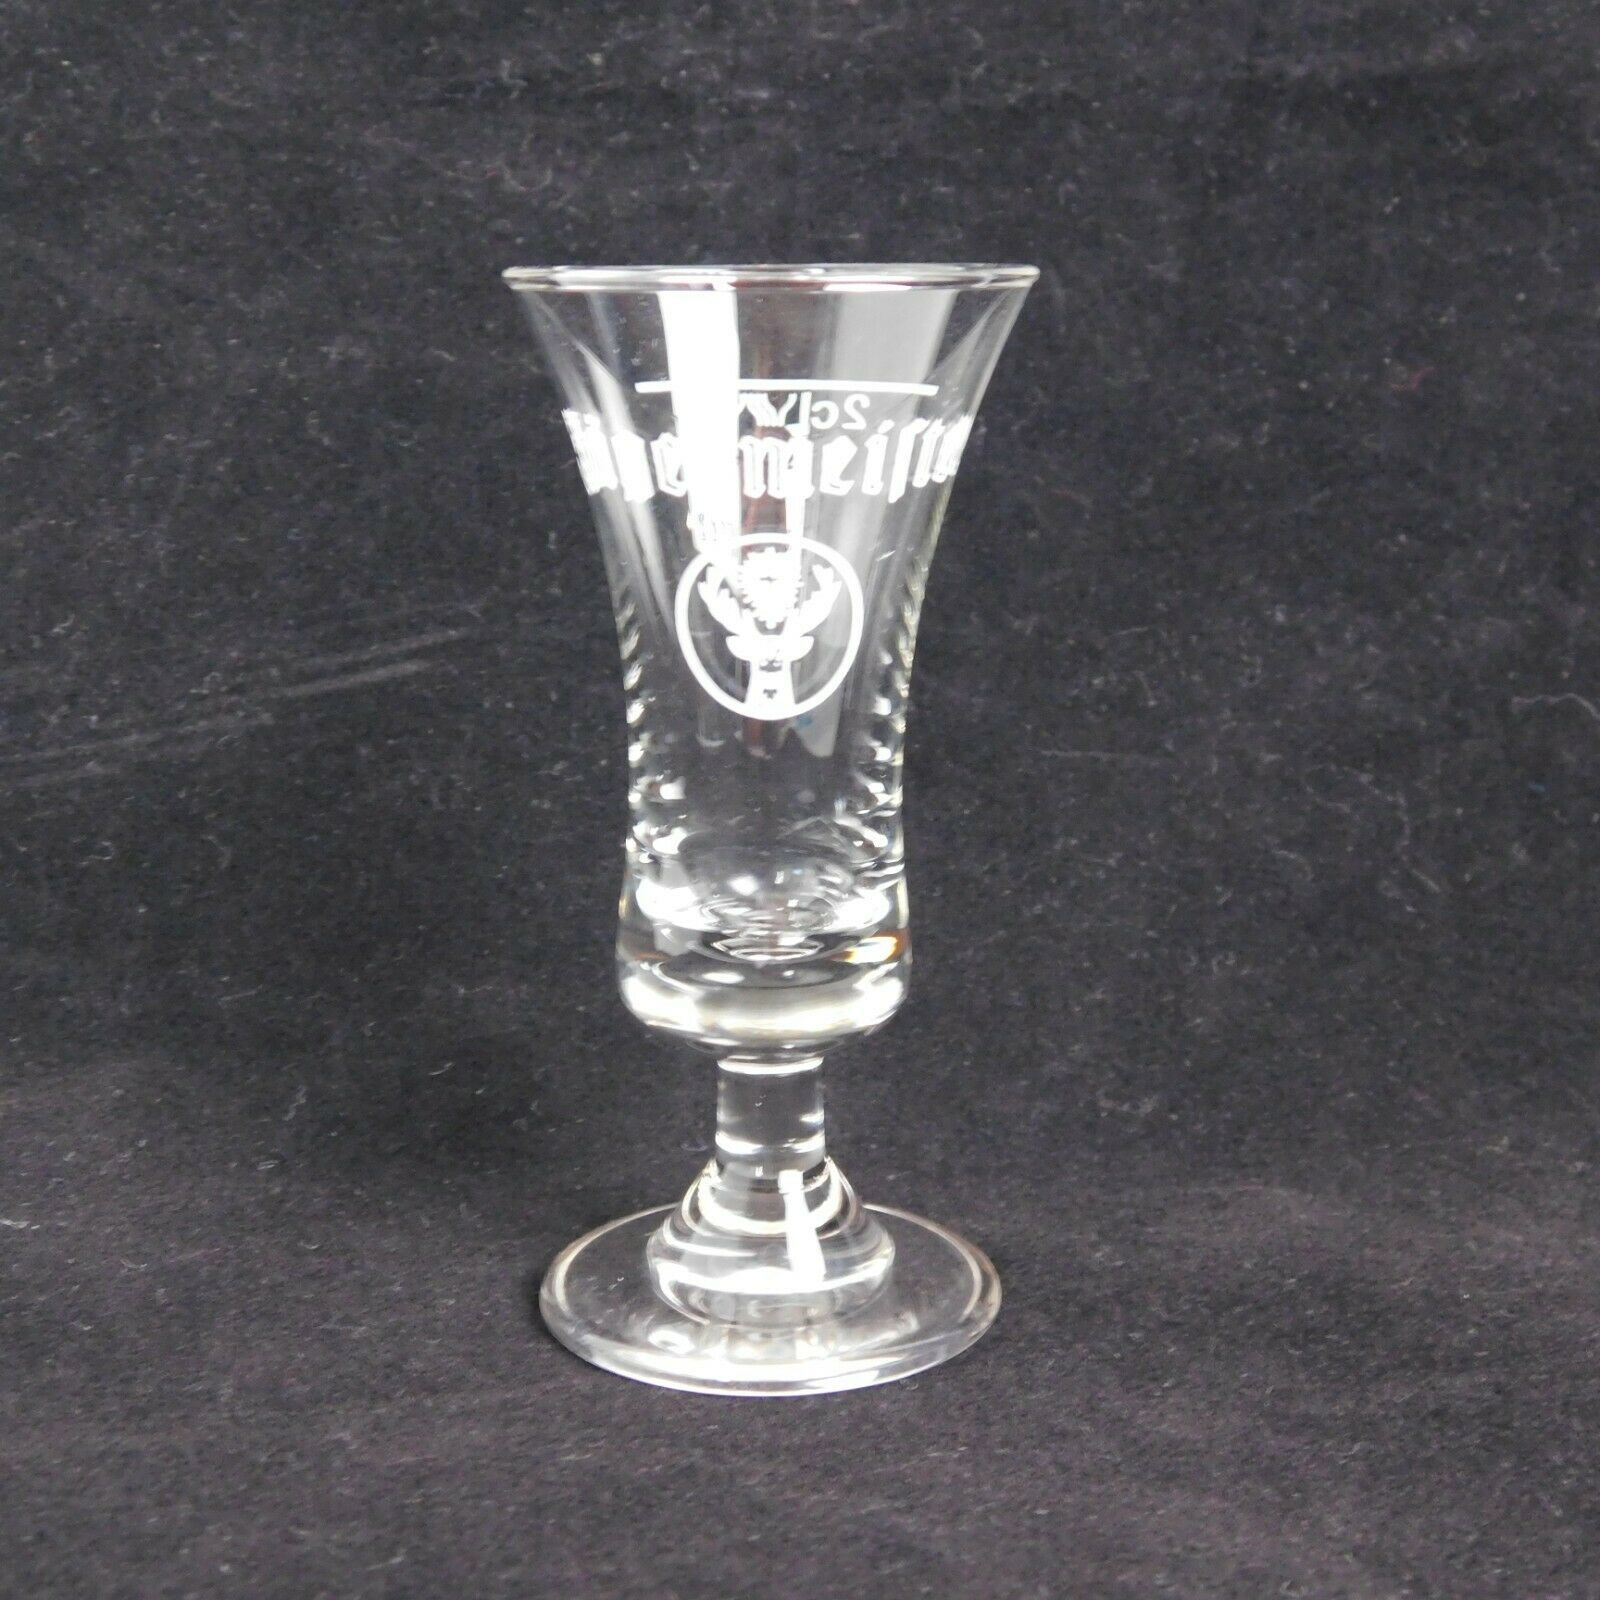 Primary image for Jagermeister Footed Shot Glass White Stag Logo Barware 3.5 High Alcohol Digestif